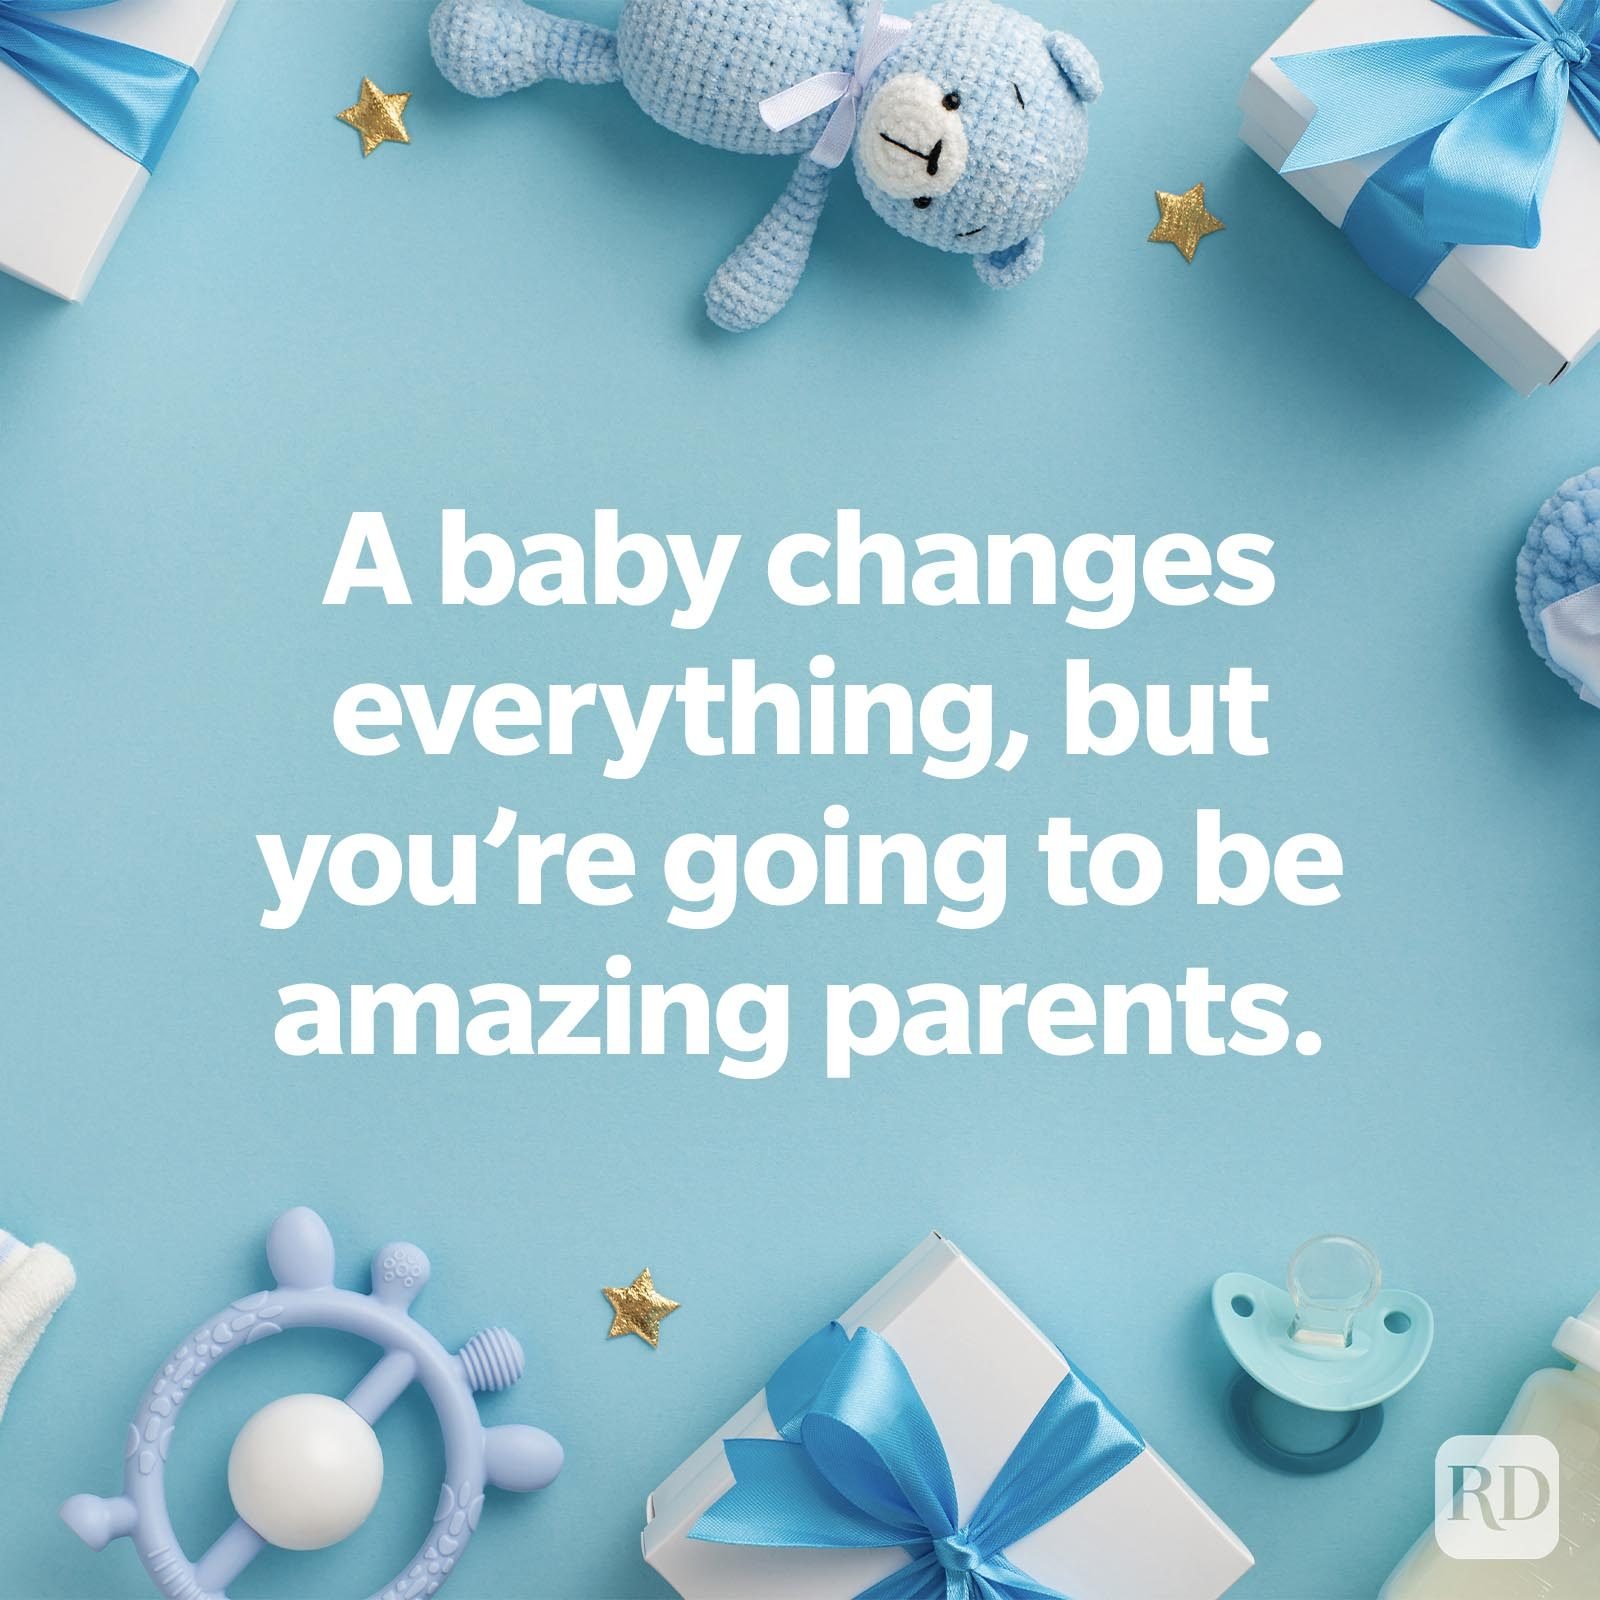 100 Sweet Baby Shower Wishes to Send to Parents in 2022